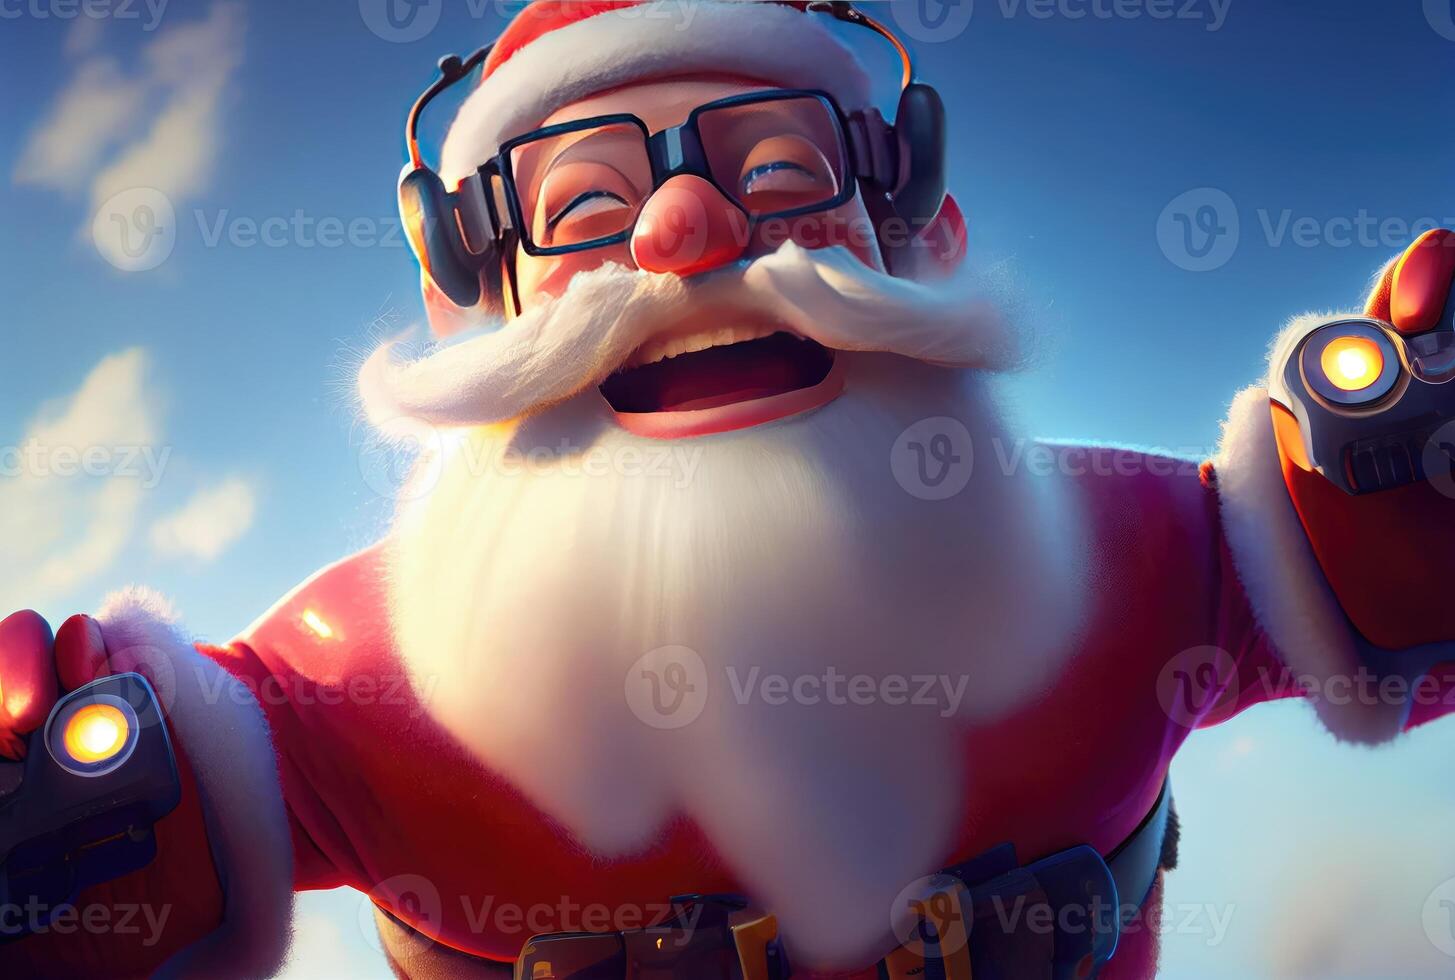 Closeup head shot of Santa Claus face flying on in the blue sky and cloudy background. Merry Christmas and Happy new year concept. Digital art illustration. photo